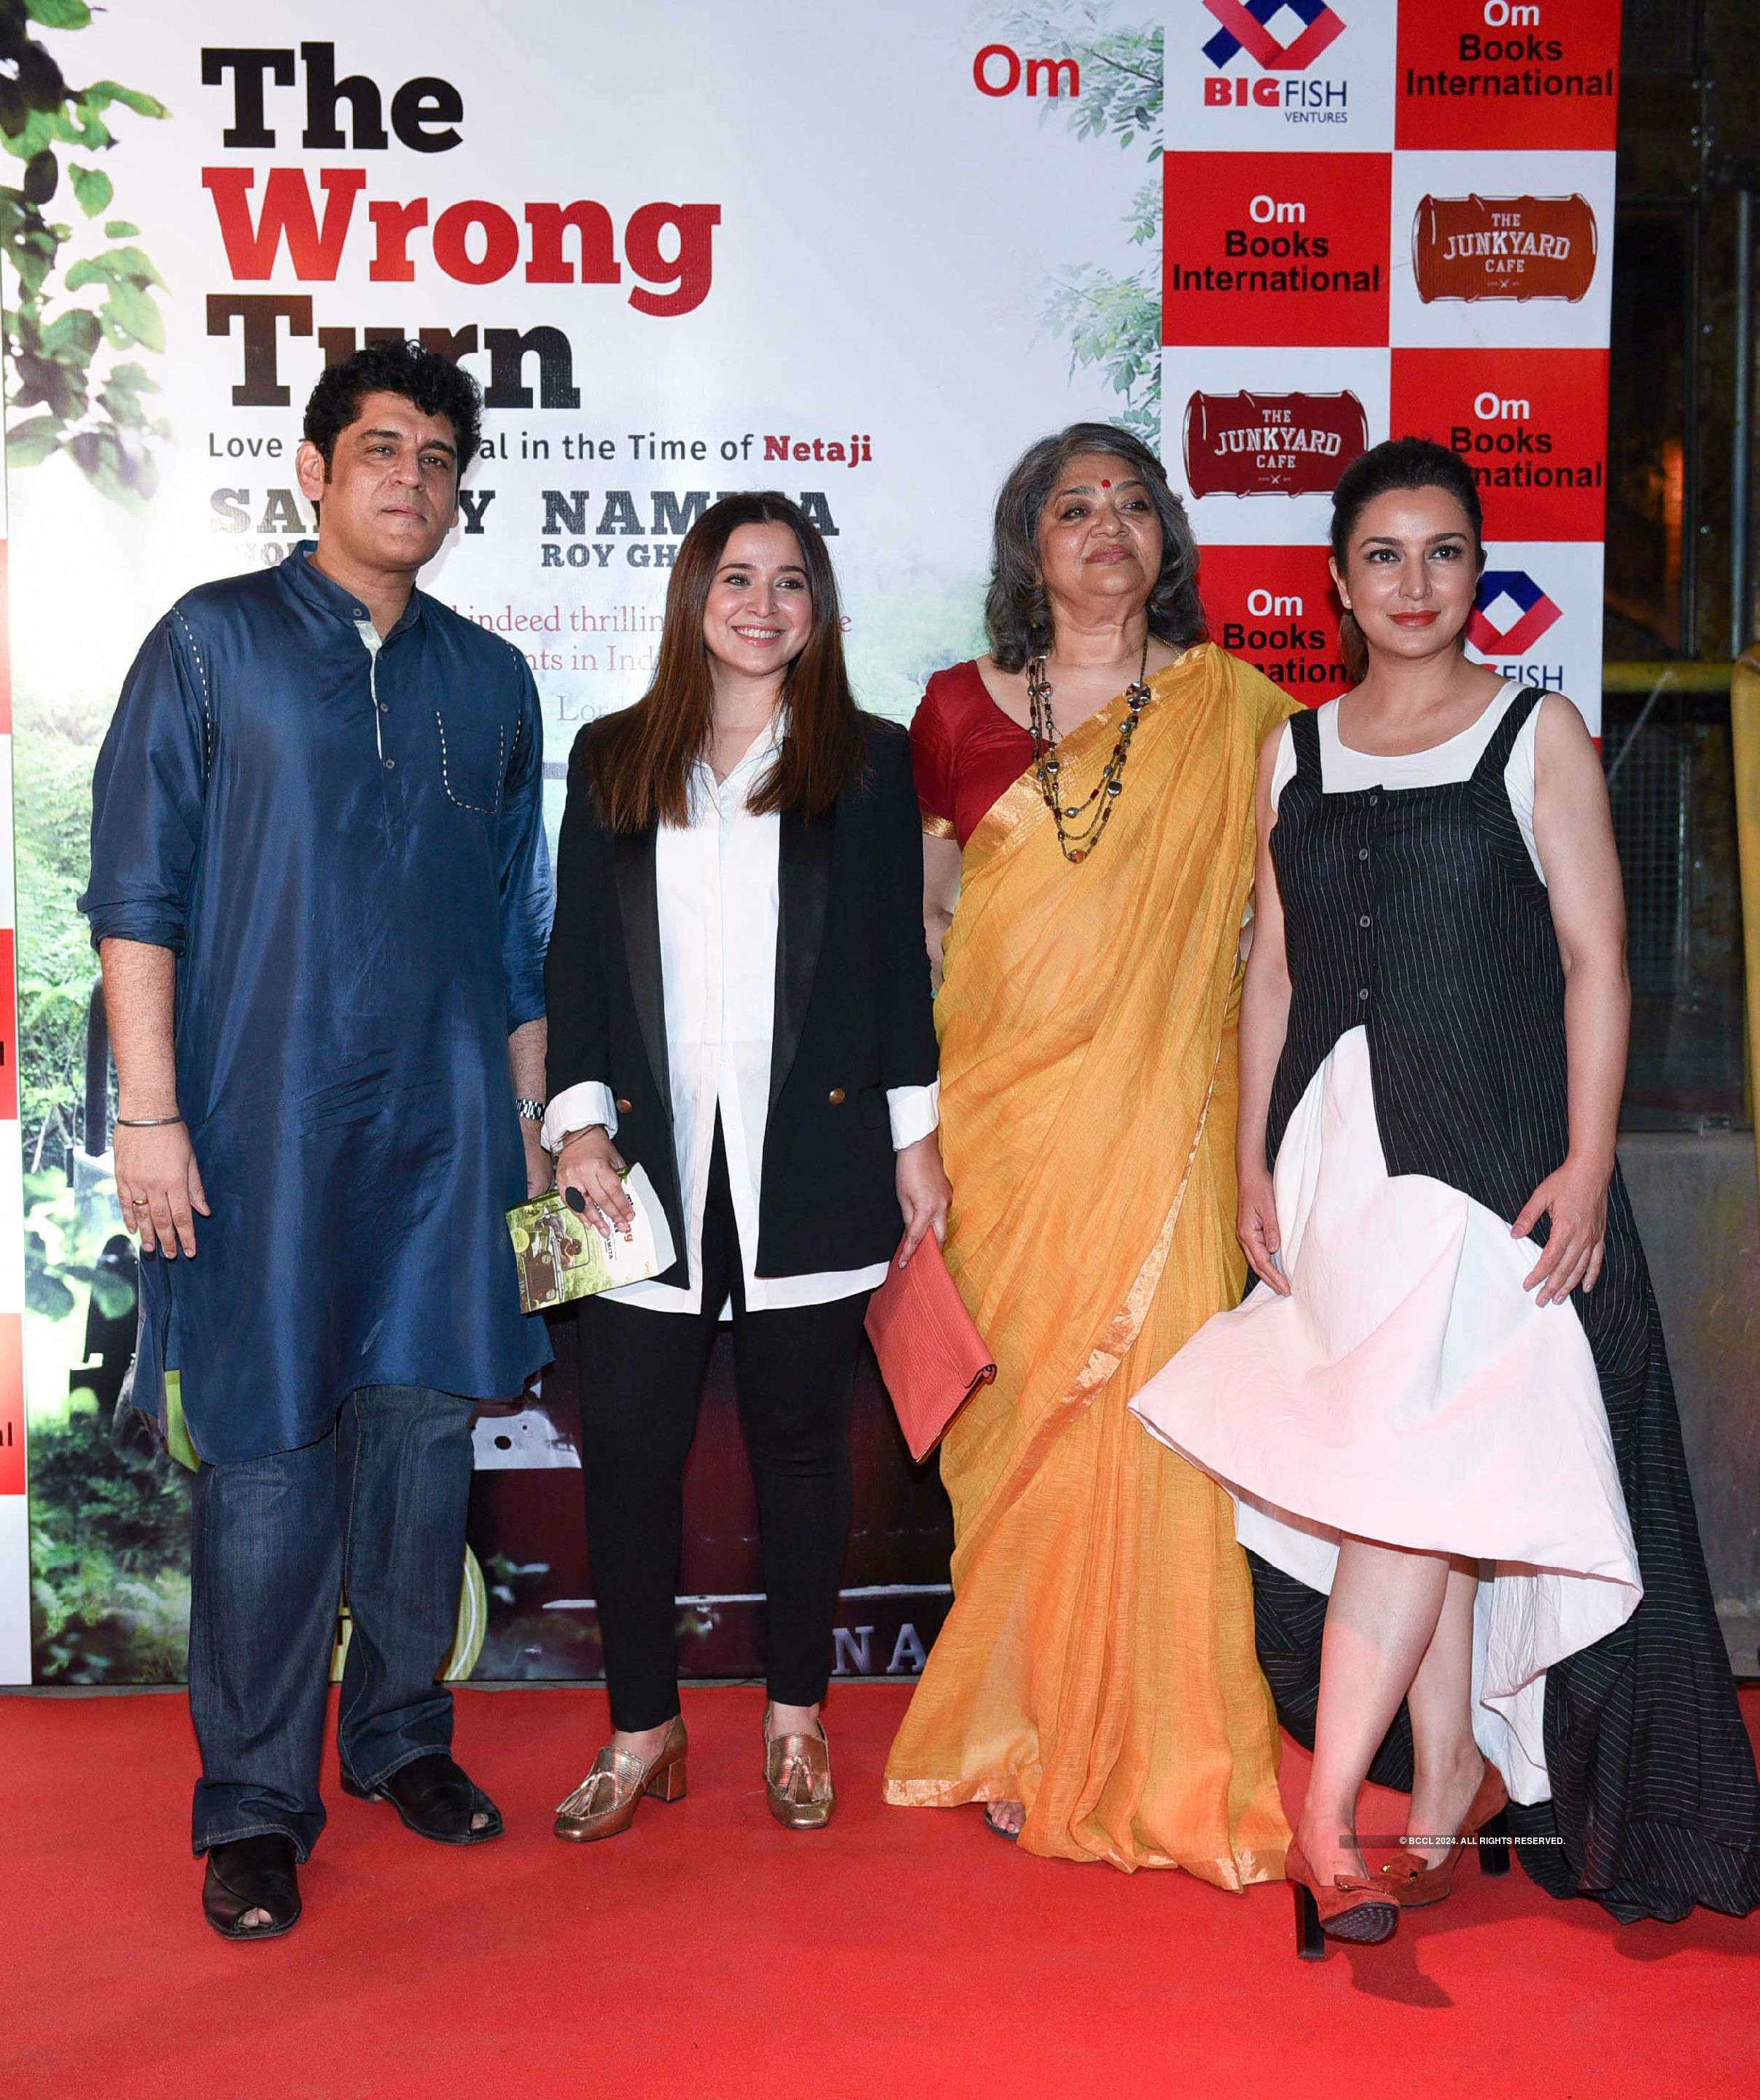 The Wrong Turn: Book Launch